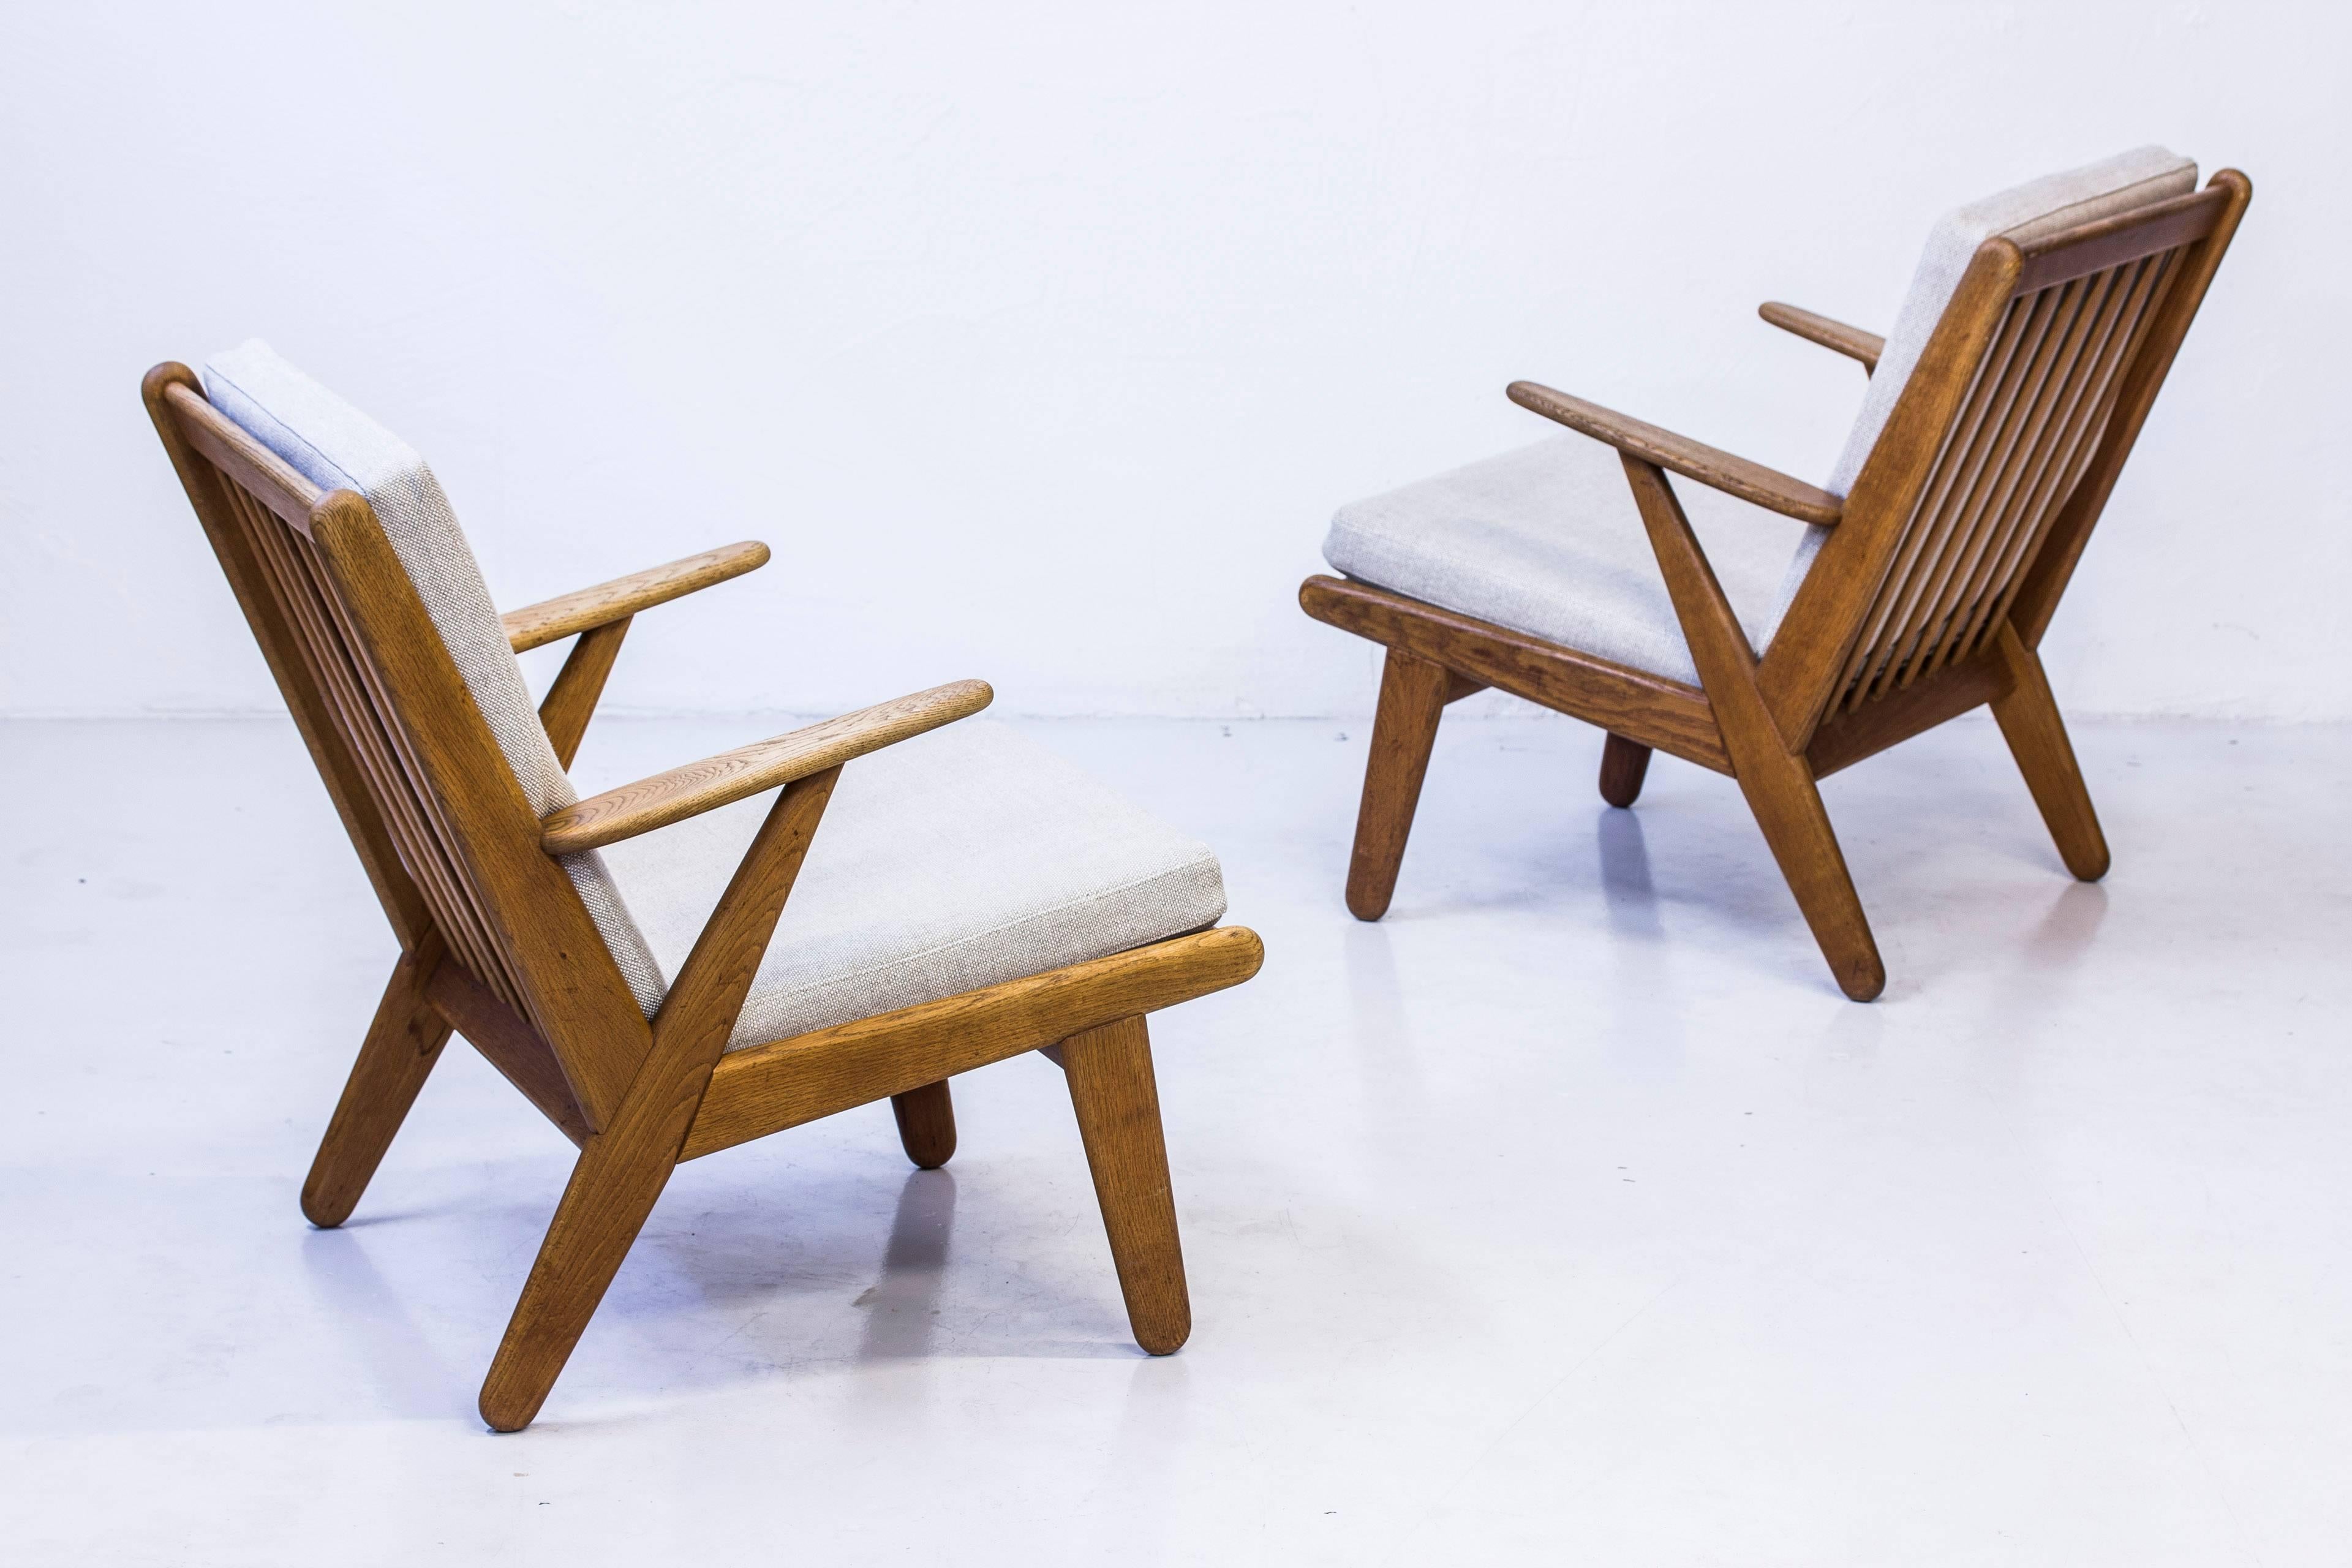 Pair of easy chairs designed by Poul Volther. Produced in Denmark by FDB during the 1950s. Made from solid oiled oak with new foam cushions and new upholstery in linen. Excellent condition with light age related patina and wear. 

Price for the